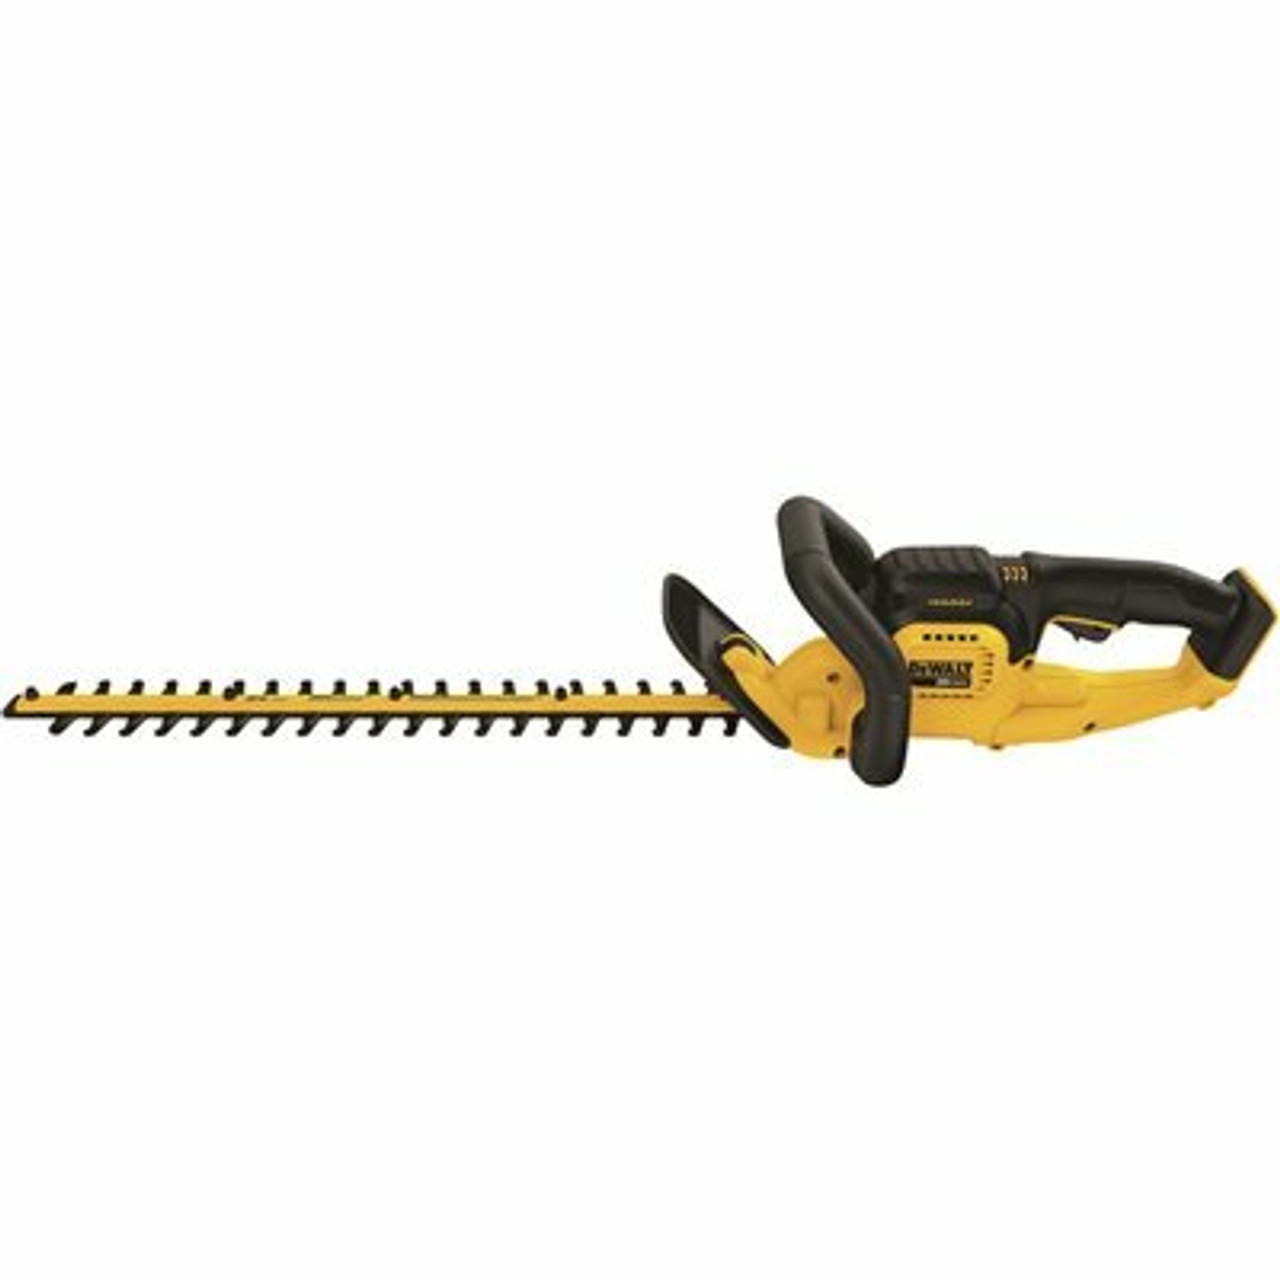 Dewalt 22 In. 20V Max Lithium-Ion Cordless Hedge Trimmer (Tool Only)